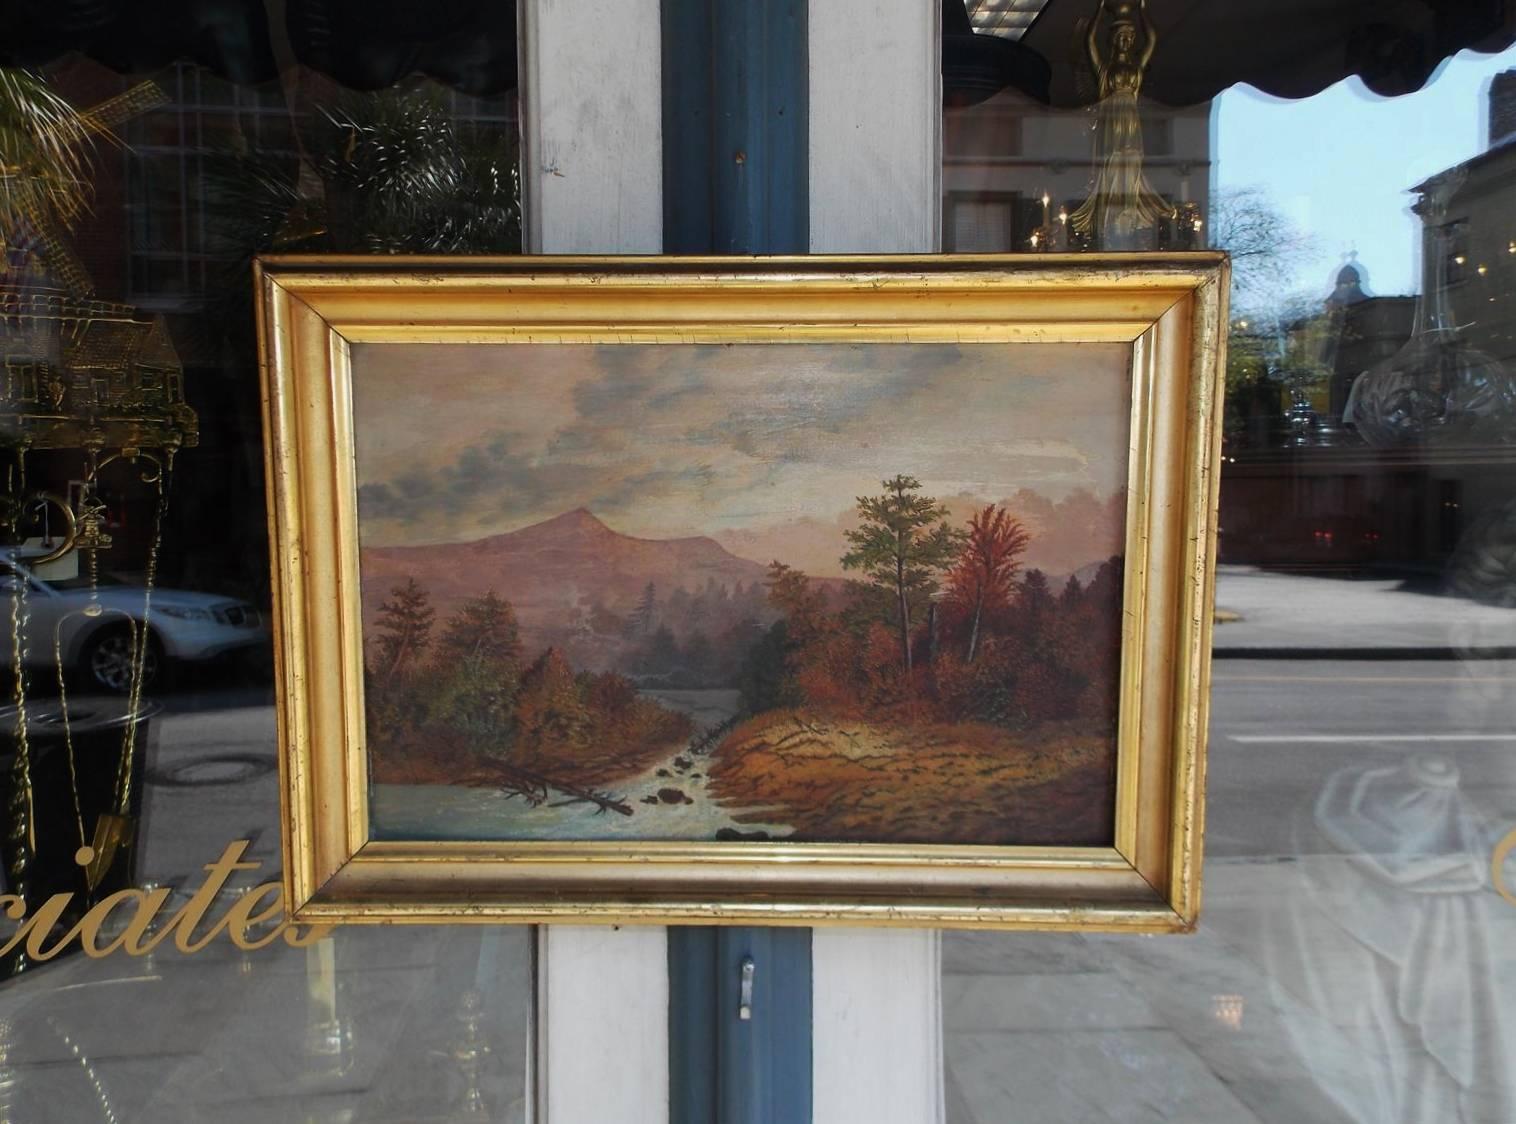 American school oil landscape on academy board in the original gold gilt molded frame. Landscape depicts Hudson Valley with mountains in the background, trees in the foreground and a flowing rocky stream, Early 19th century. Inscribed Mrs. Demming